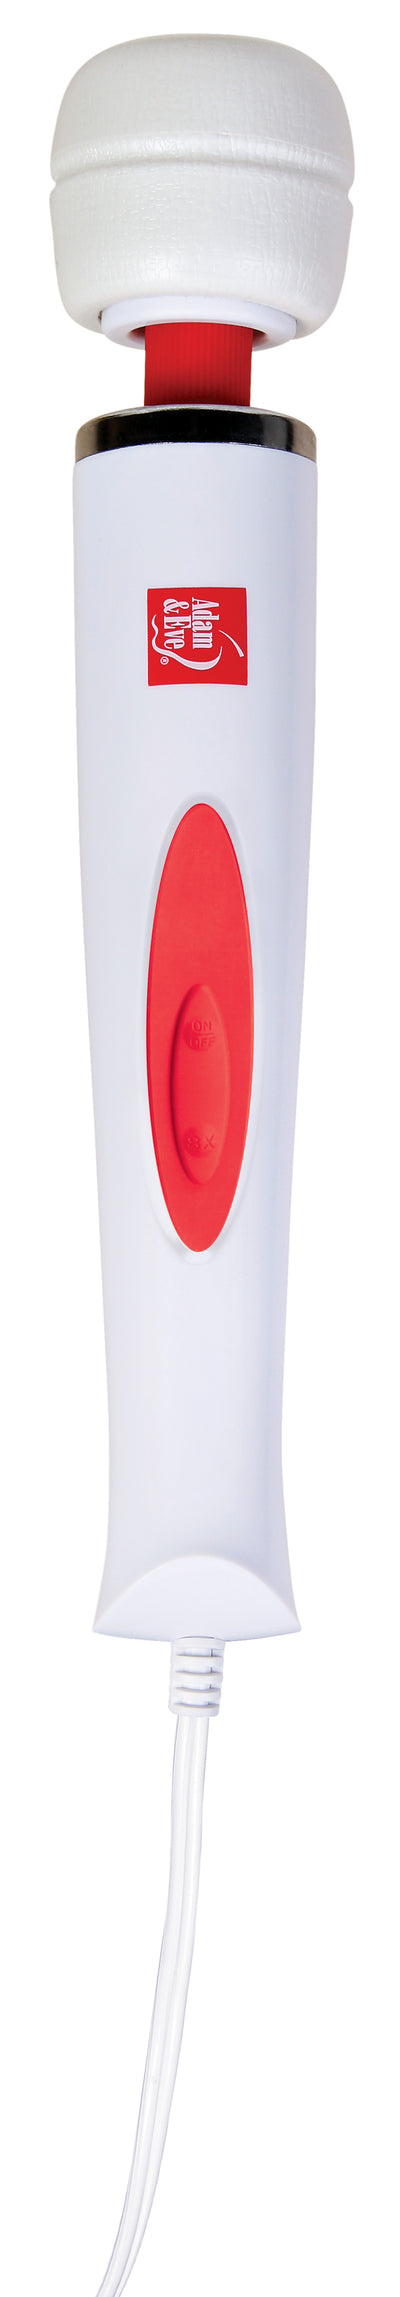 Experience Intense Orgasms with Our Magic Massager Deluxe - Now with 8 Speeds!